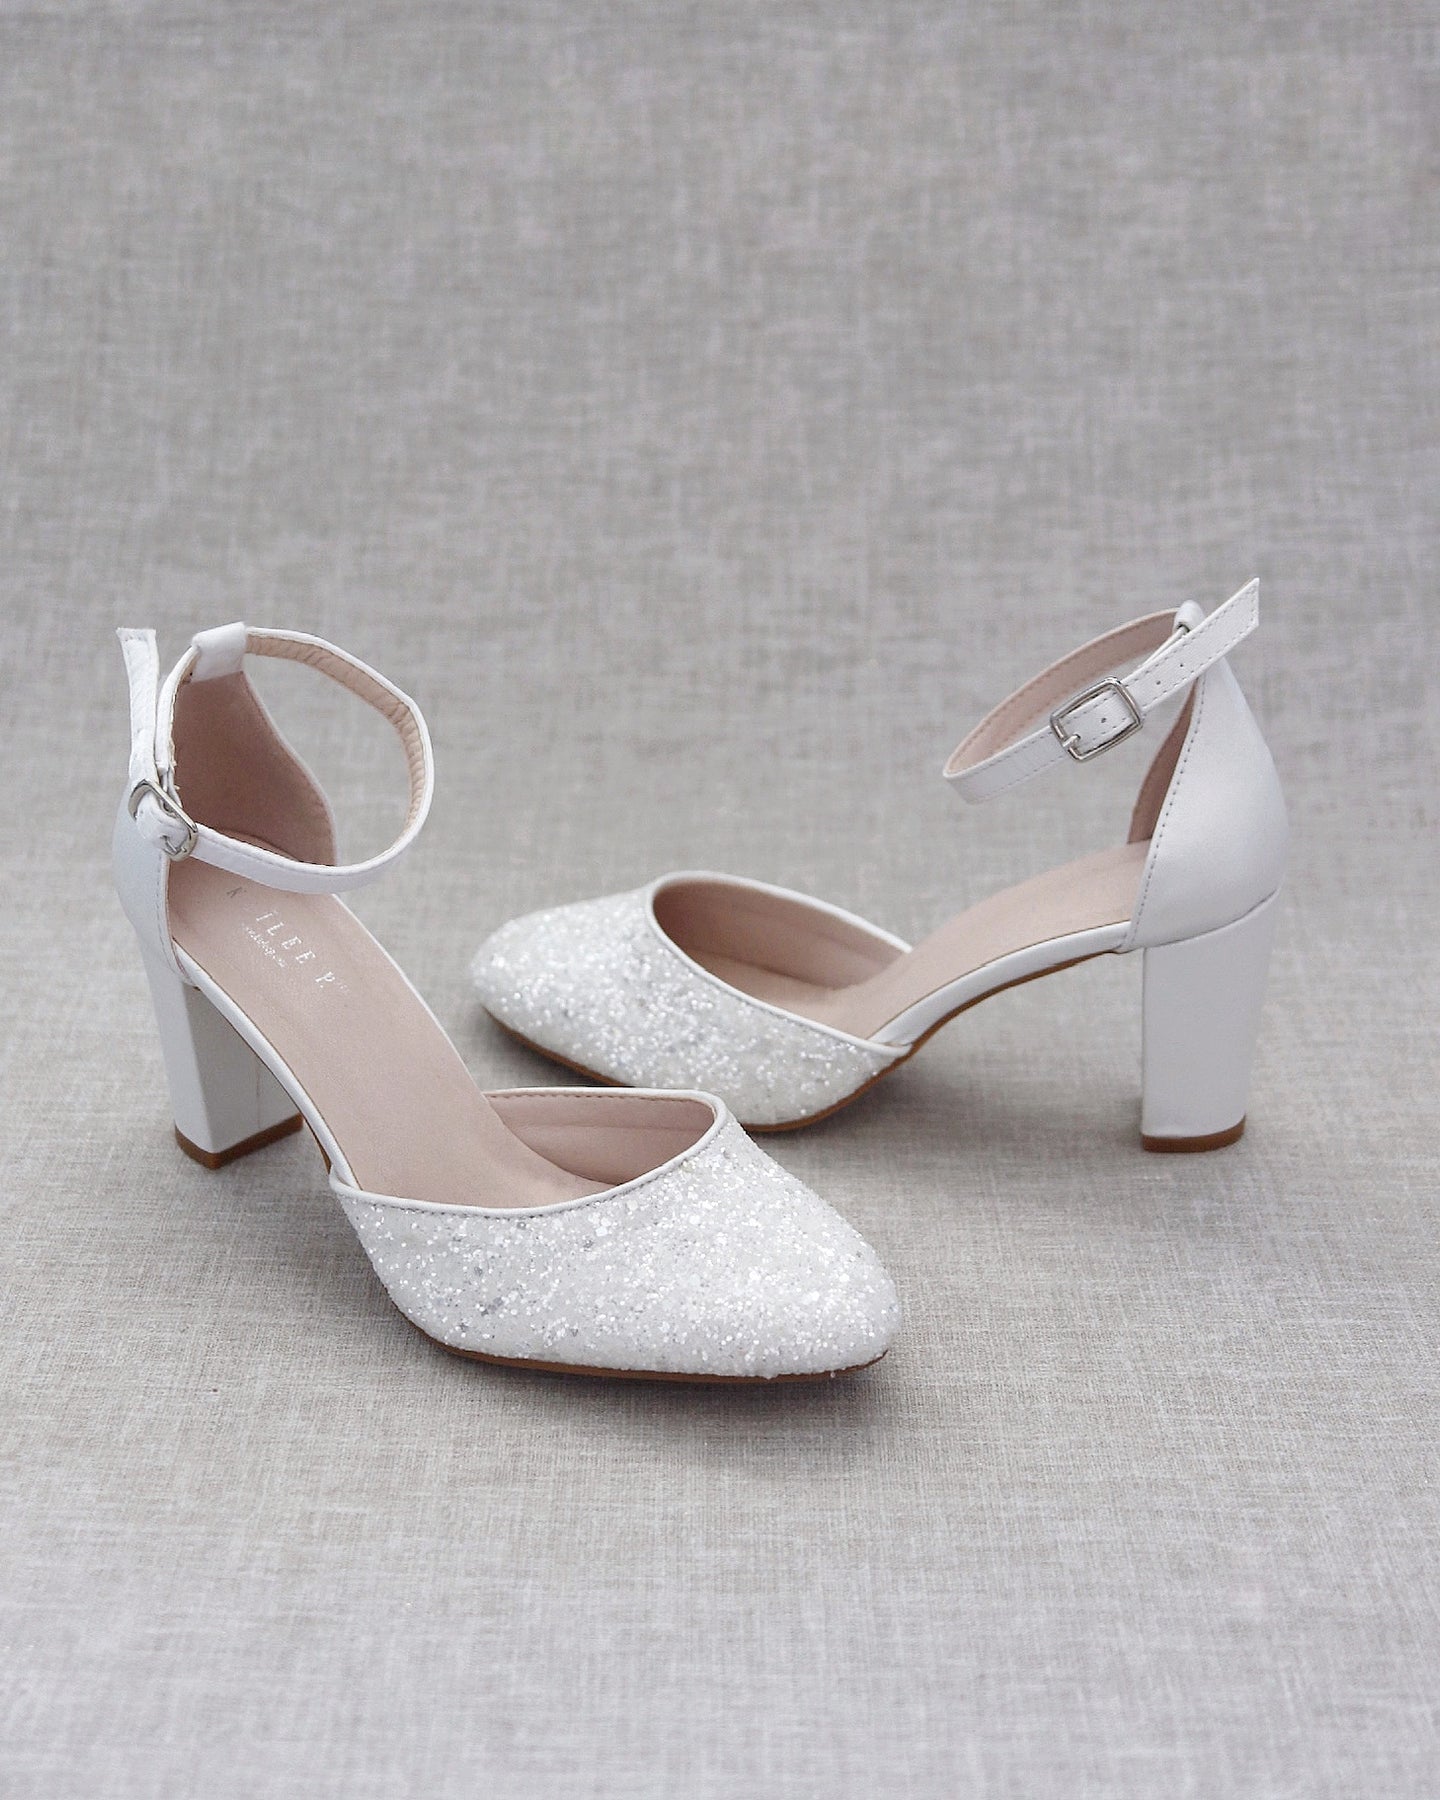 White Rock Block Heel with Strap - Shoes, Wedding Shoes